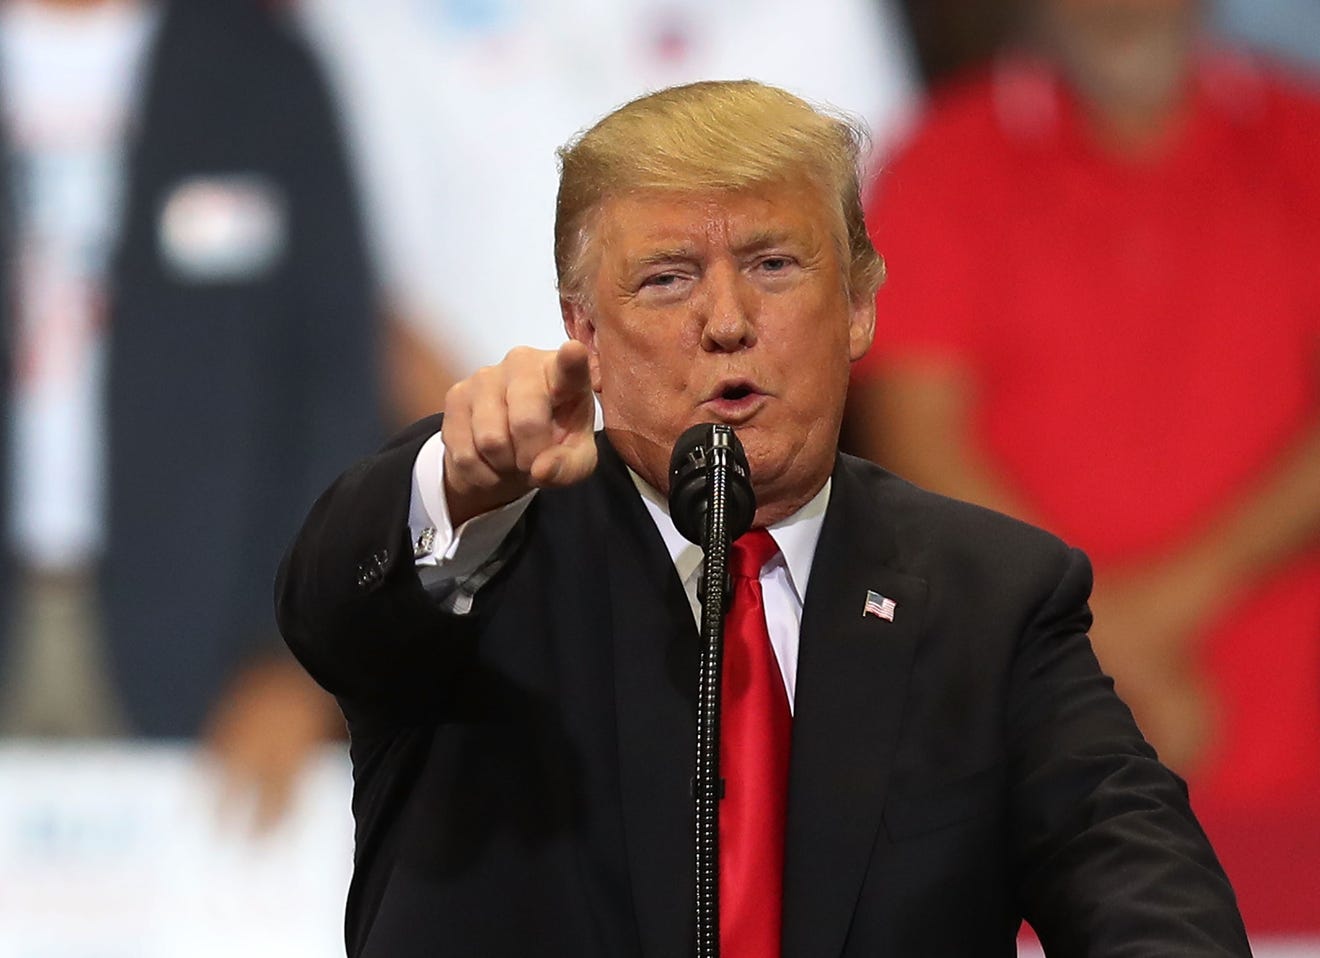 Midterm elections 2018 Trump sparks outrage with divisive campaign ad